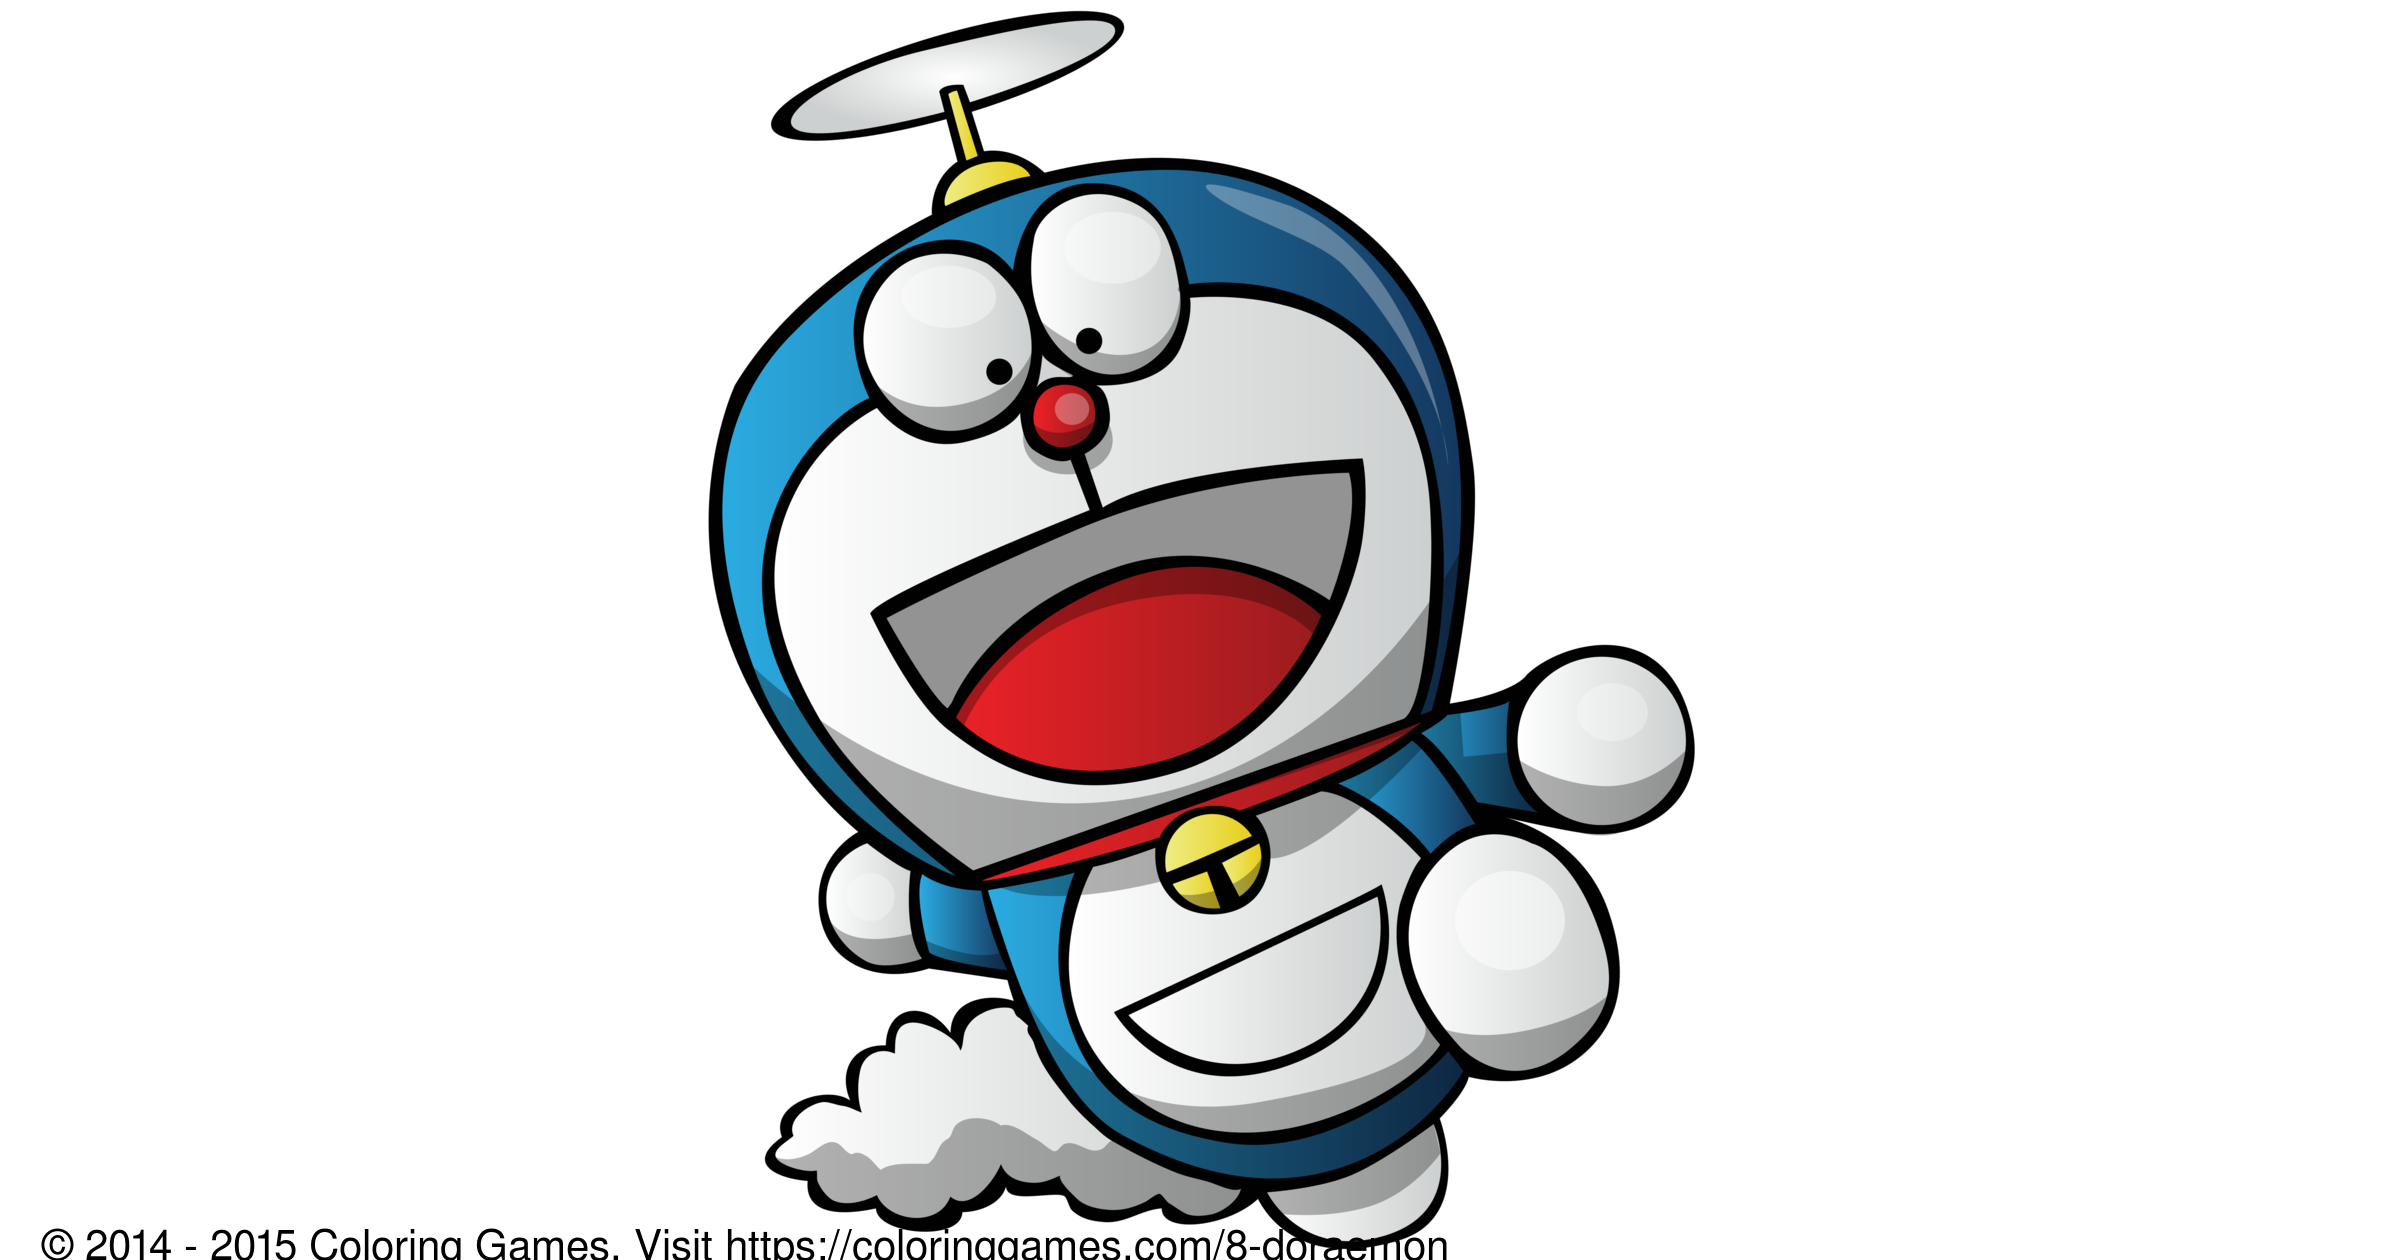 Doraemon - Coloring Games and Coloring Pages